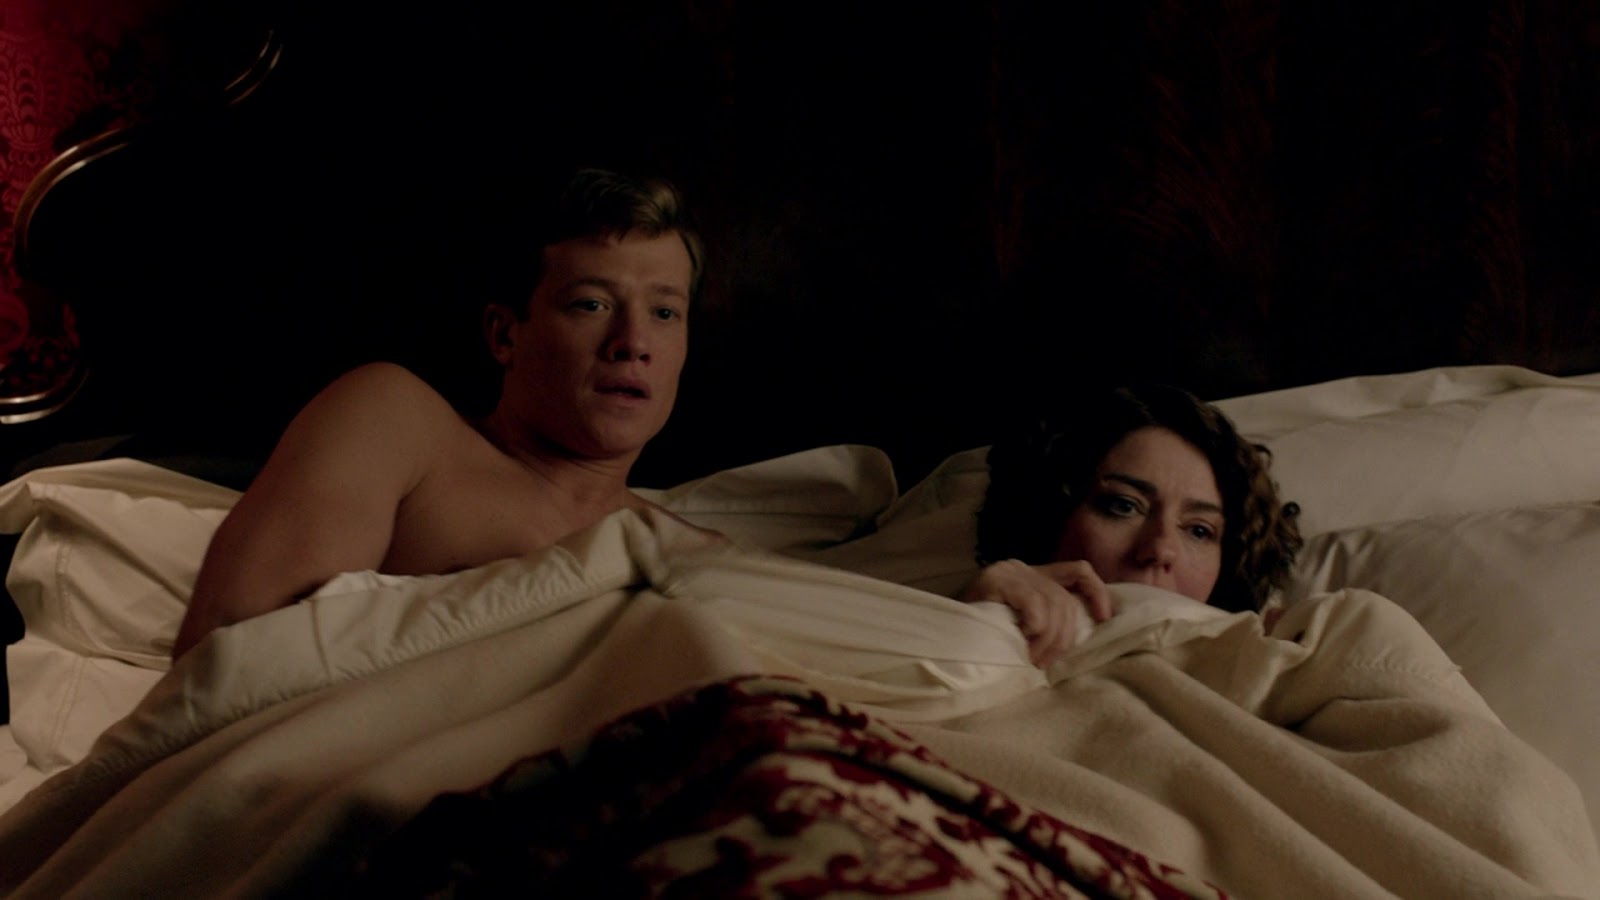 Ed Speleers shirtless in 'Downton Abbey' - S05E01.